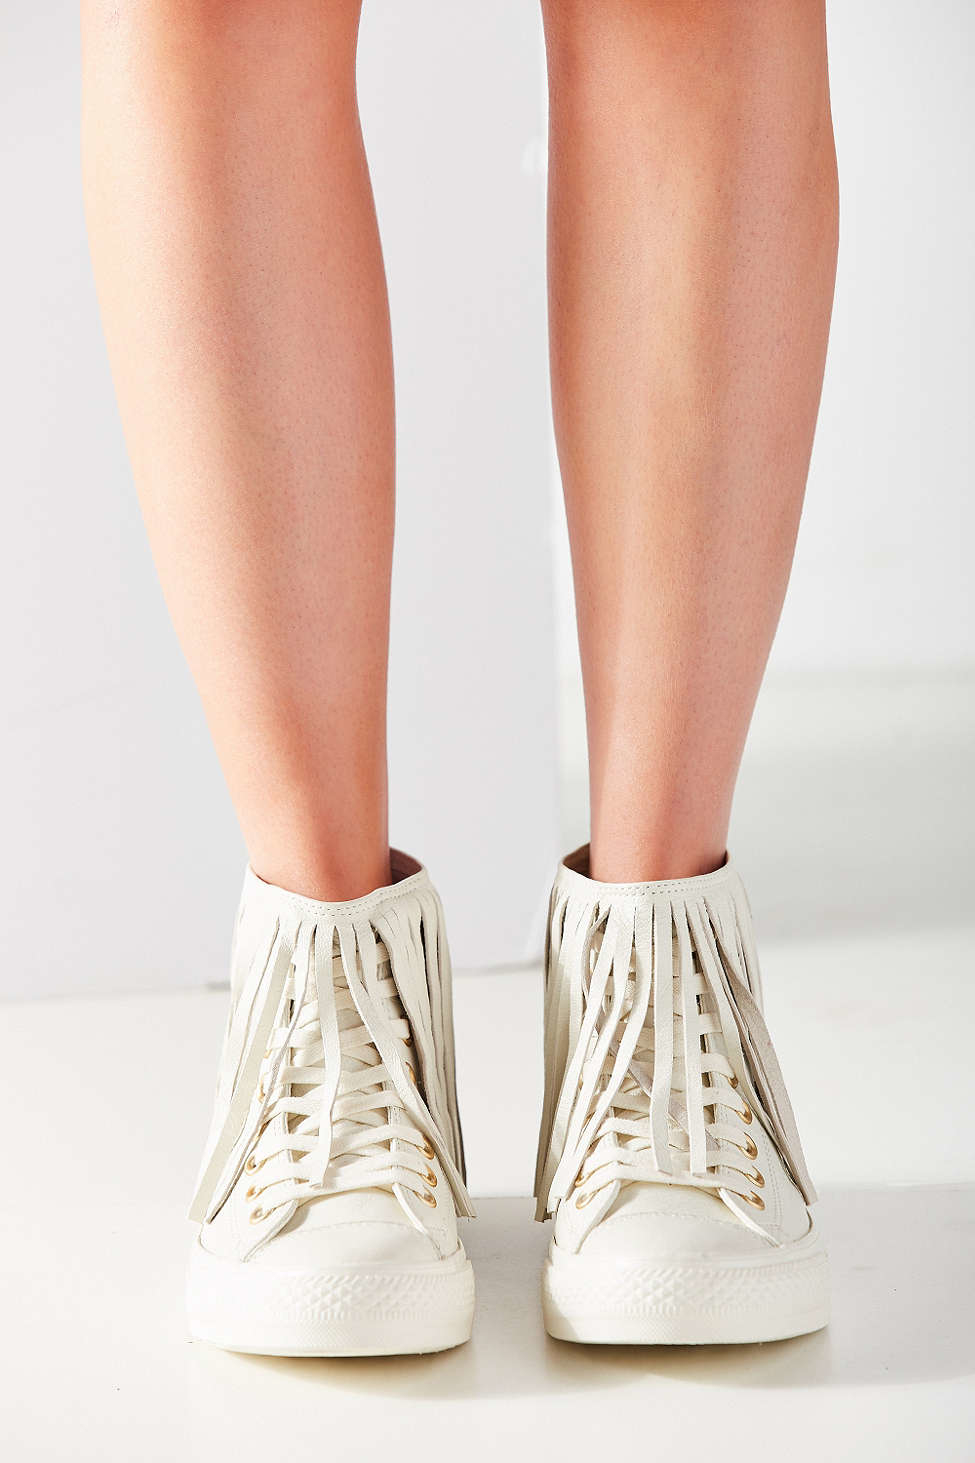 Converse Chuck Taylor All Star Fringe Sneaker in Natural | Lyst